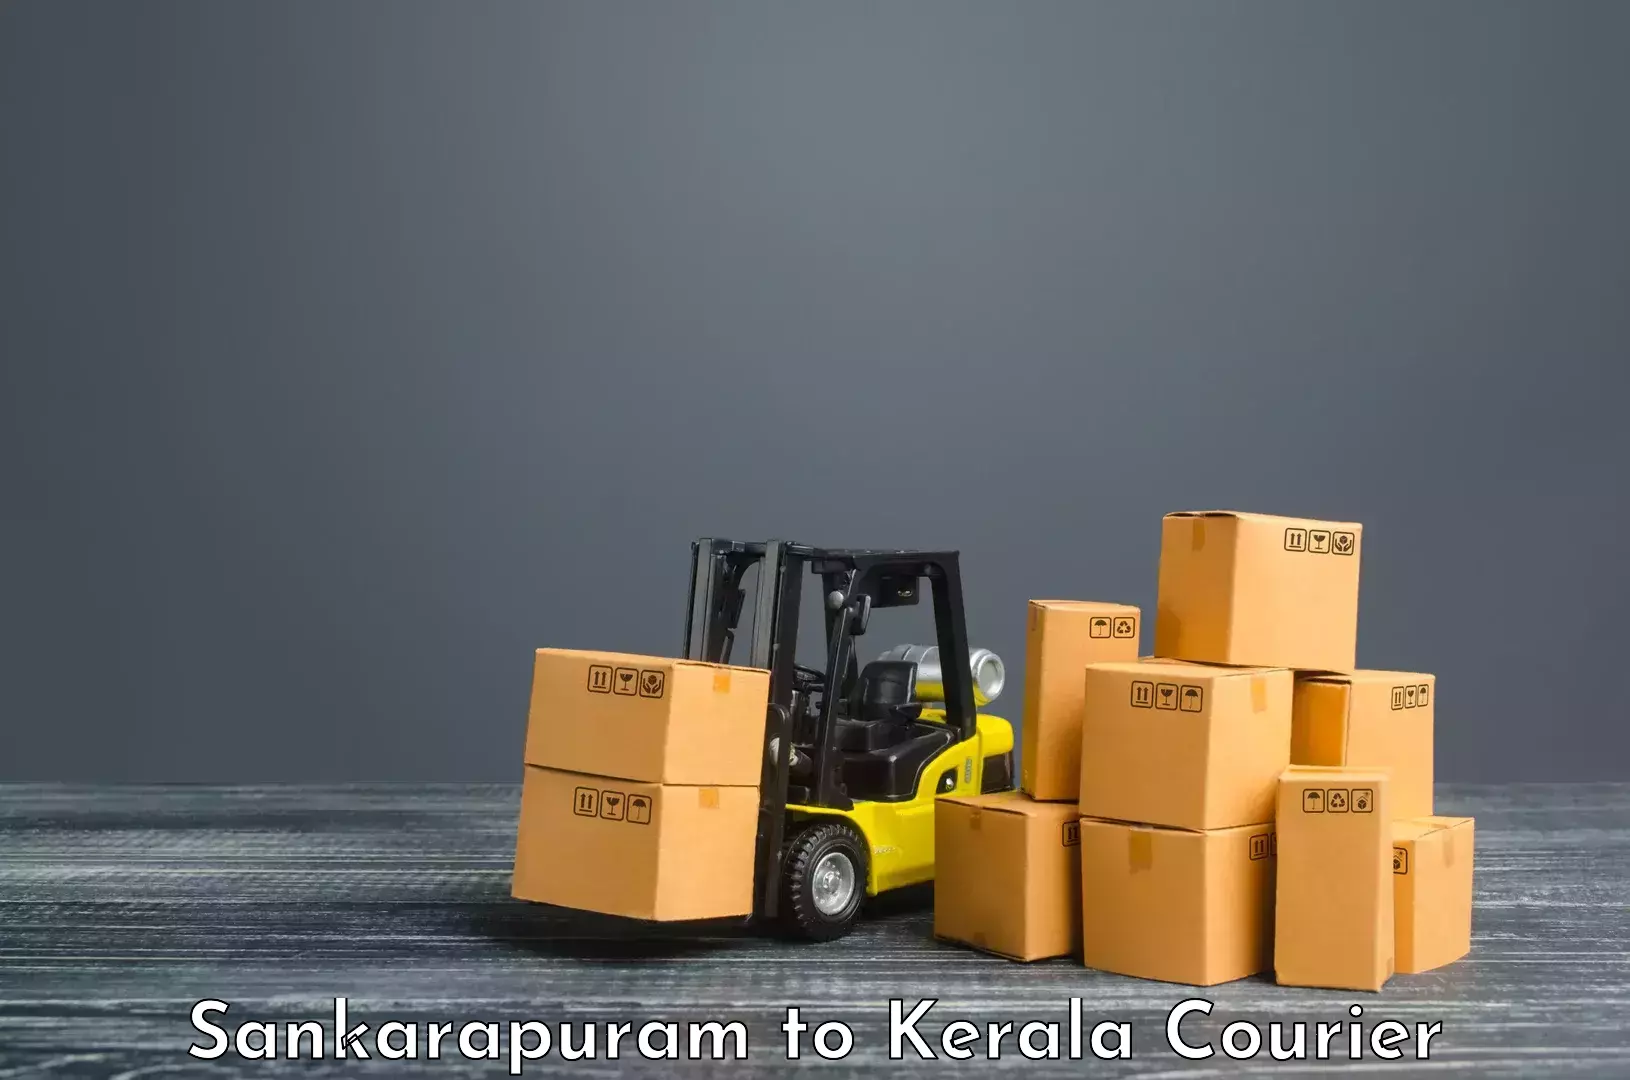 Budget-friendly shipping in Sankarapuram to Cochin University of Science and Technology